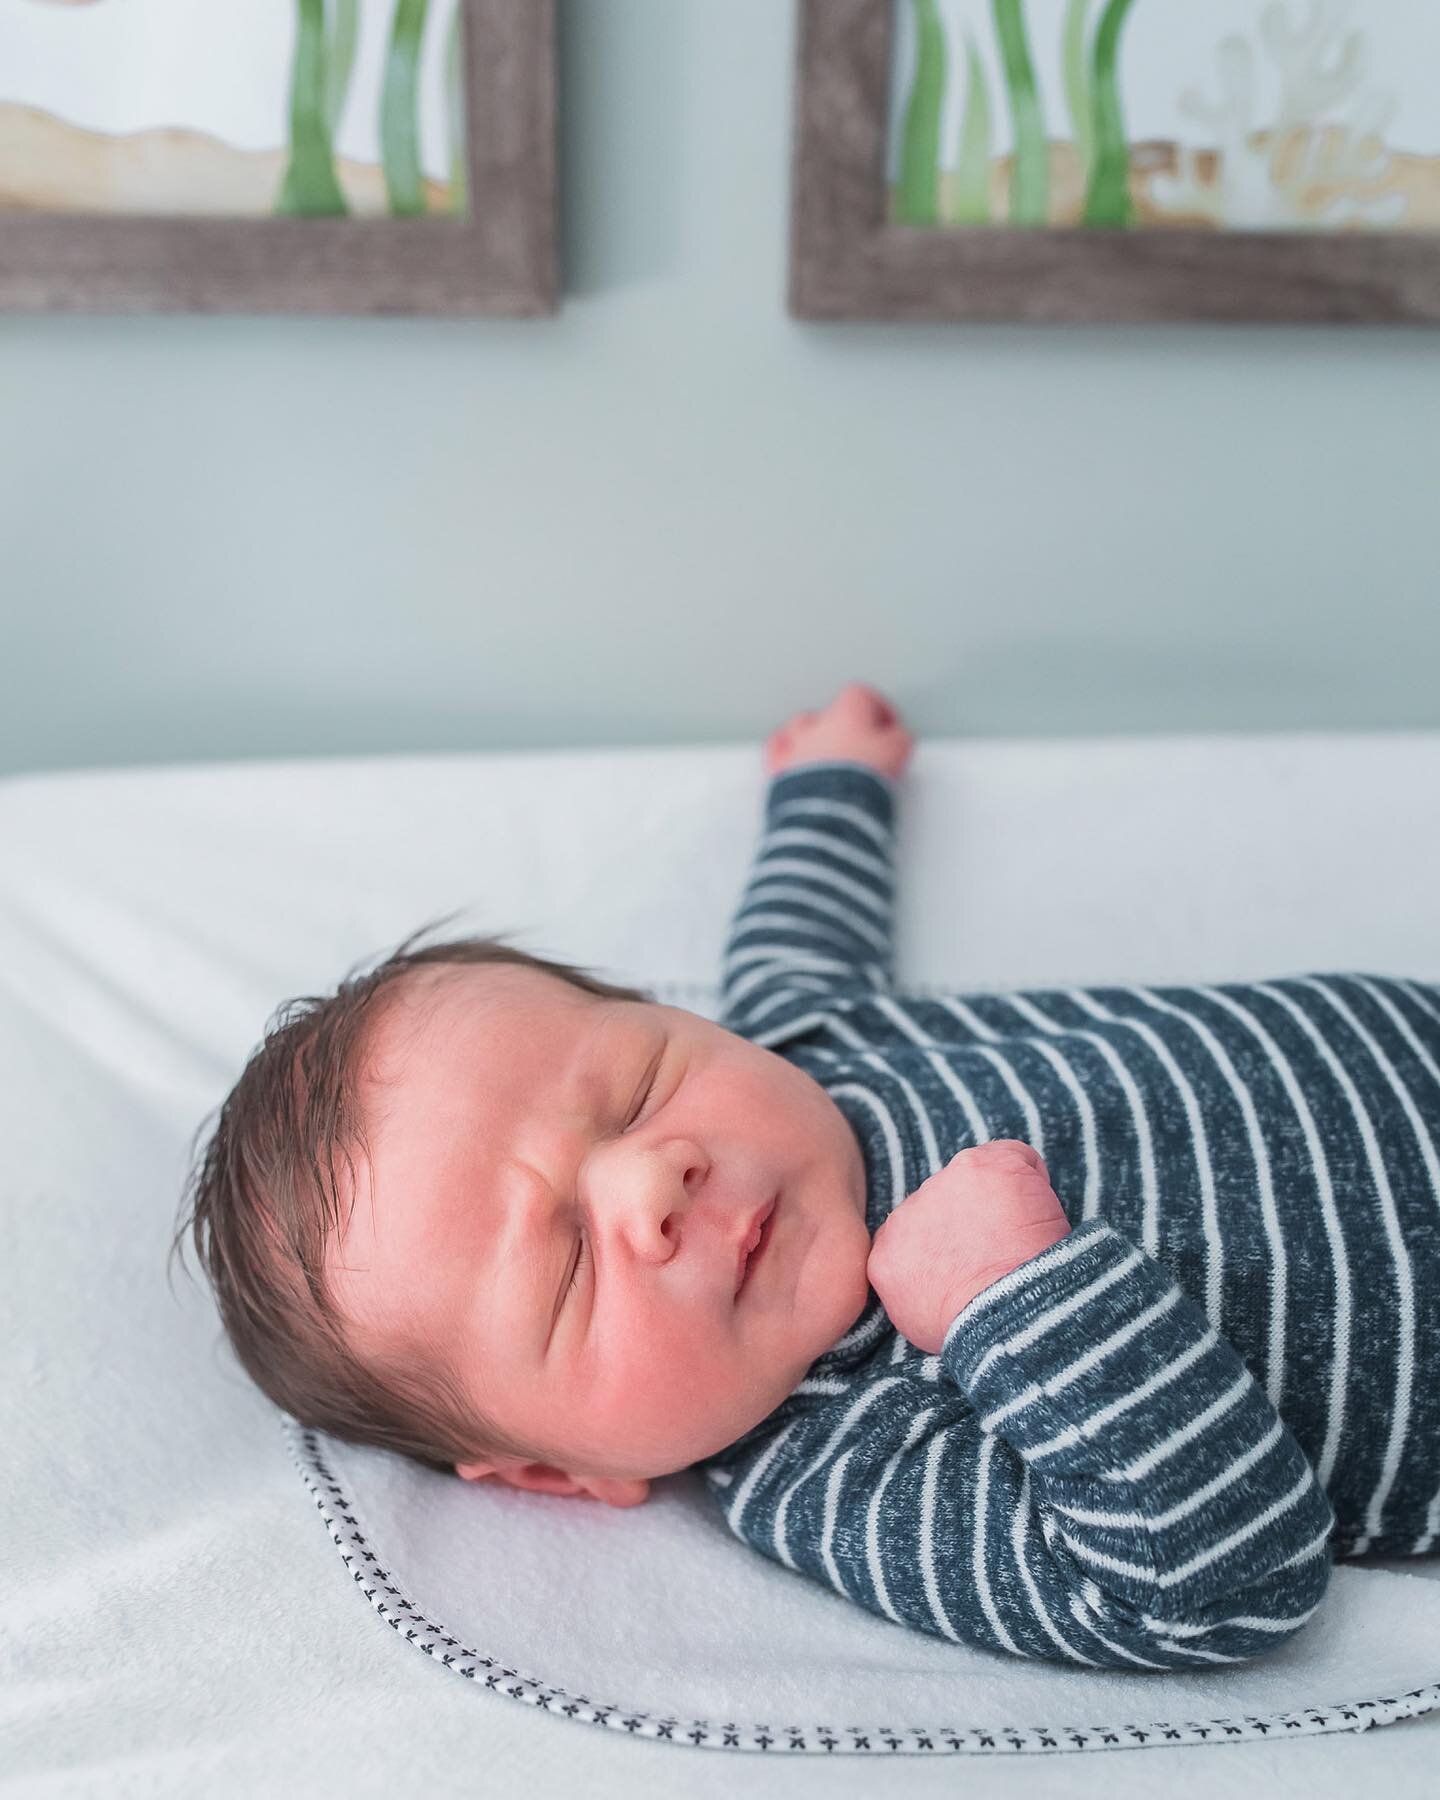 I firmly believe your home is the absolute best location for a newborn shoot. It&rsquo;s where your baby&rsquo;s story begins and the place you&rsquo;ll all want to look back at years and years from now, regardless of whether you&rsquo;re still there